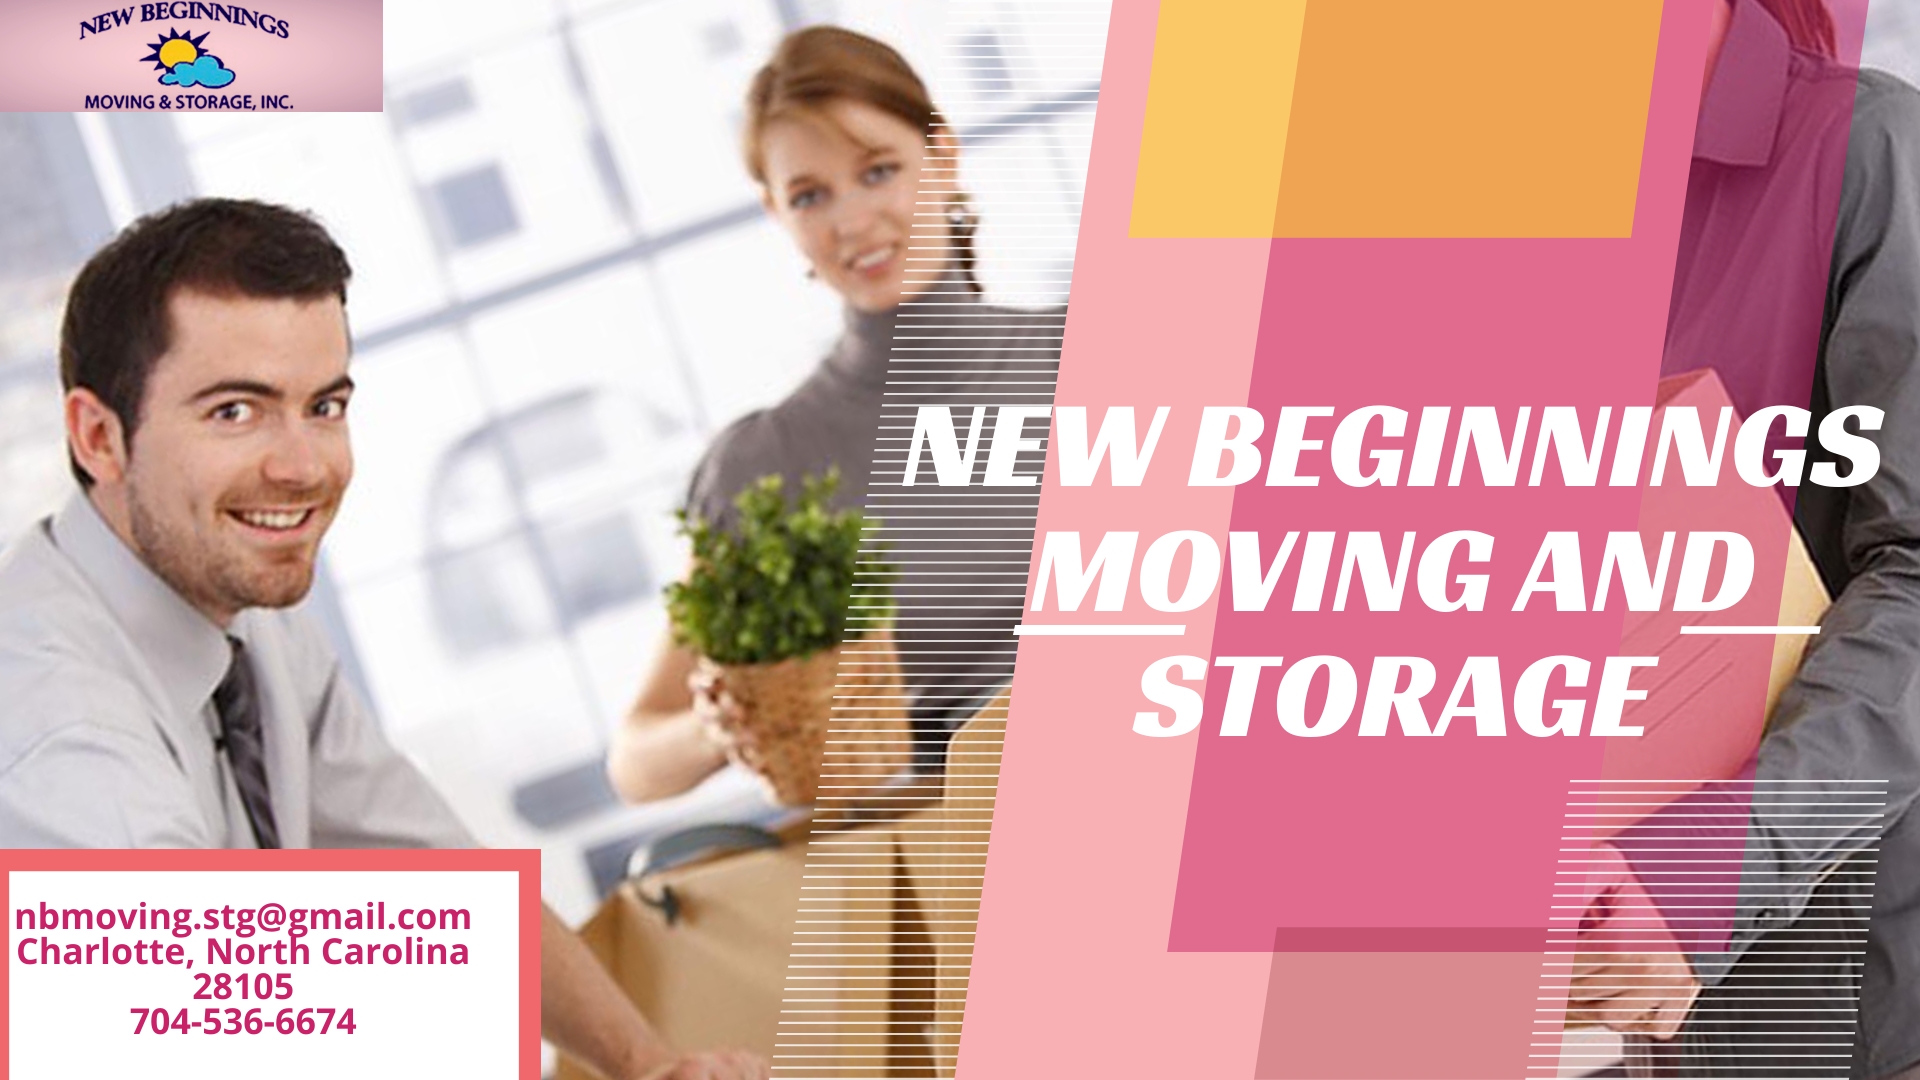 NEW BEGINNINGS MOVING AND STORAGE-local movers Charlotte NC